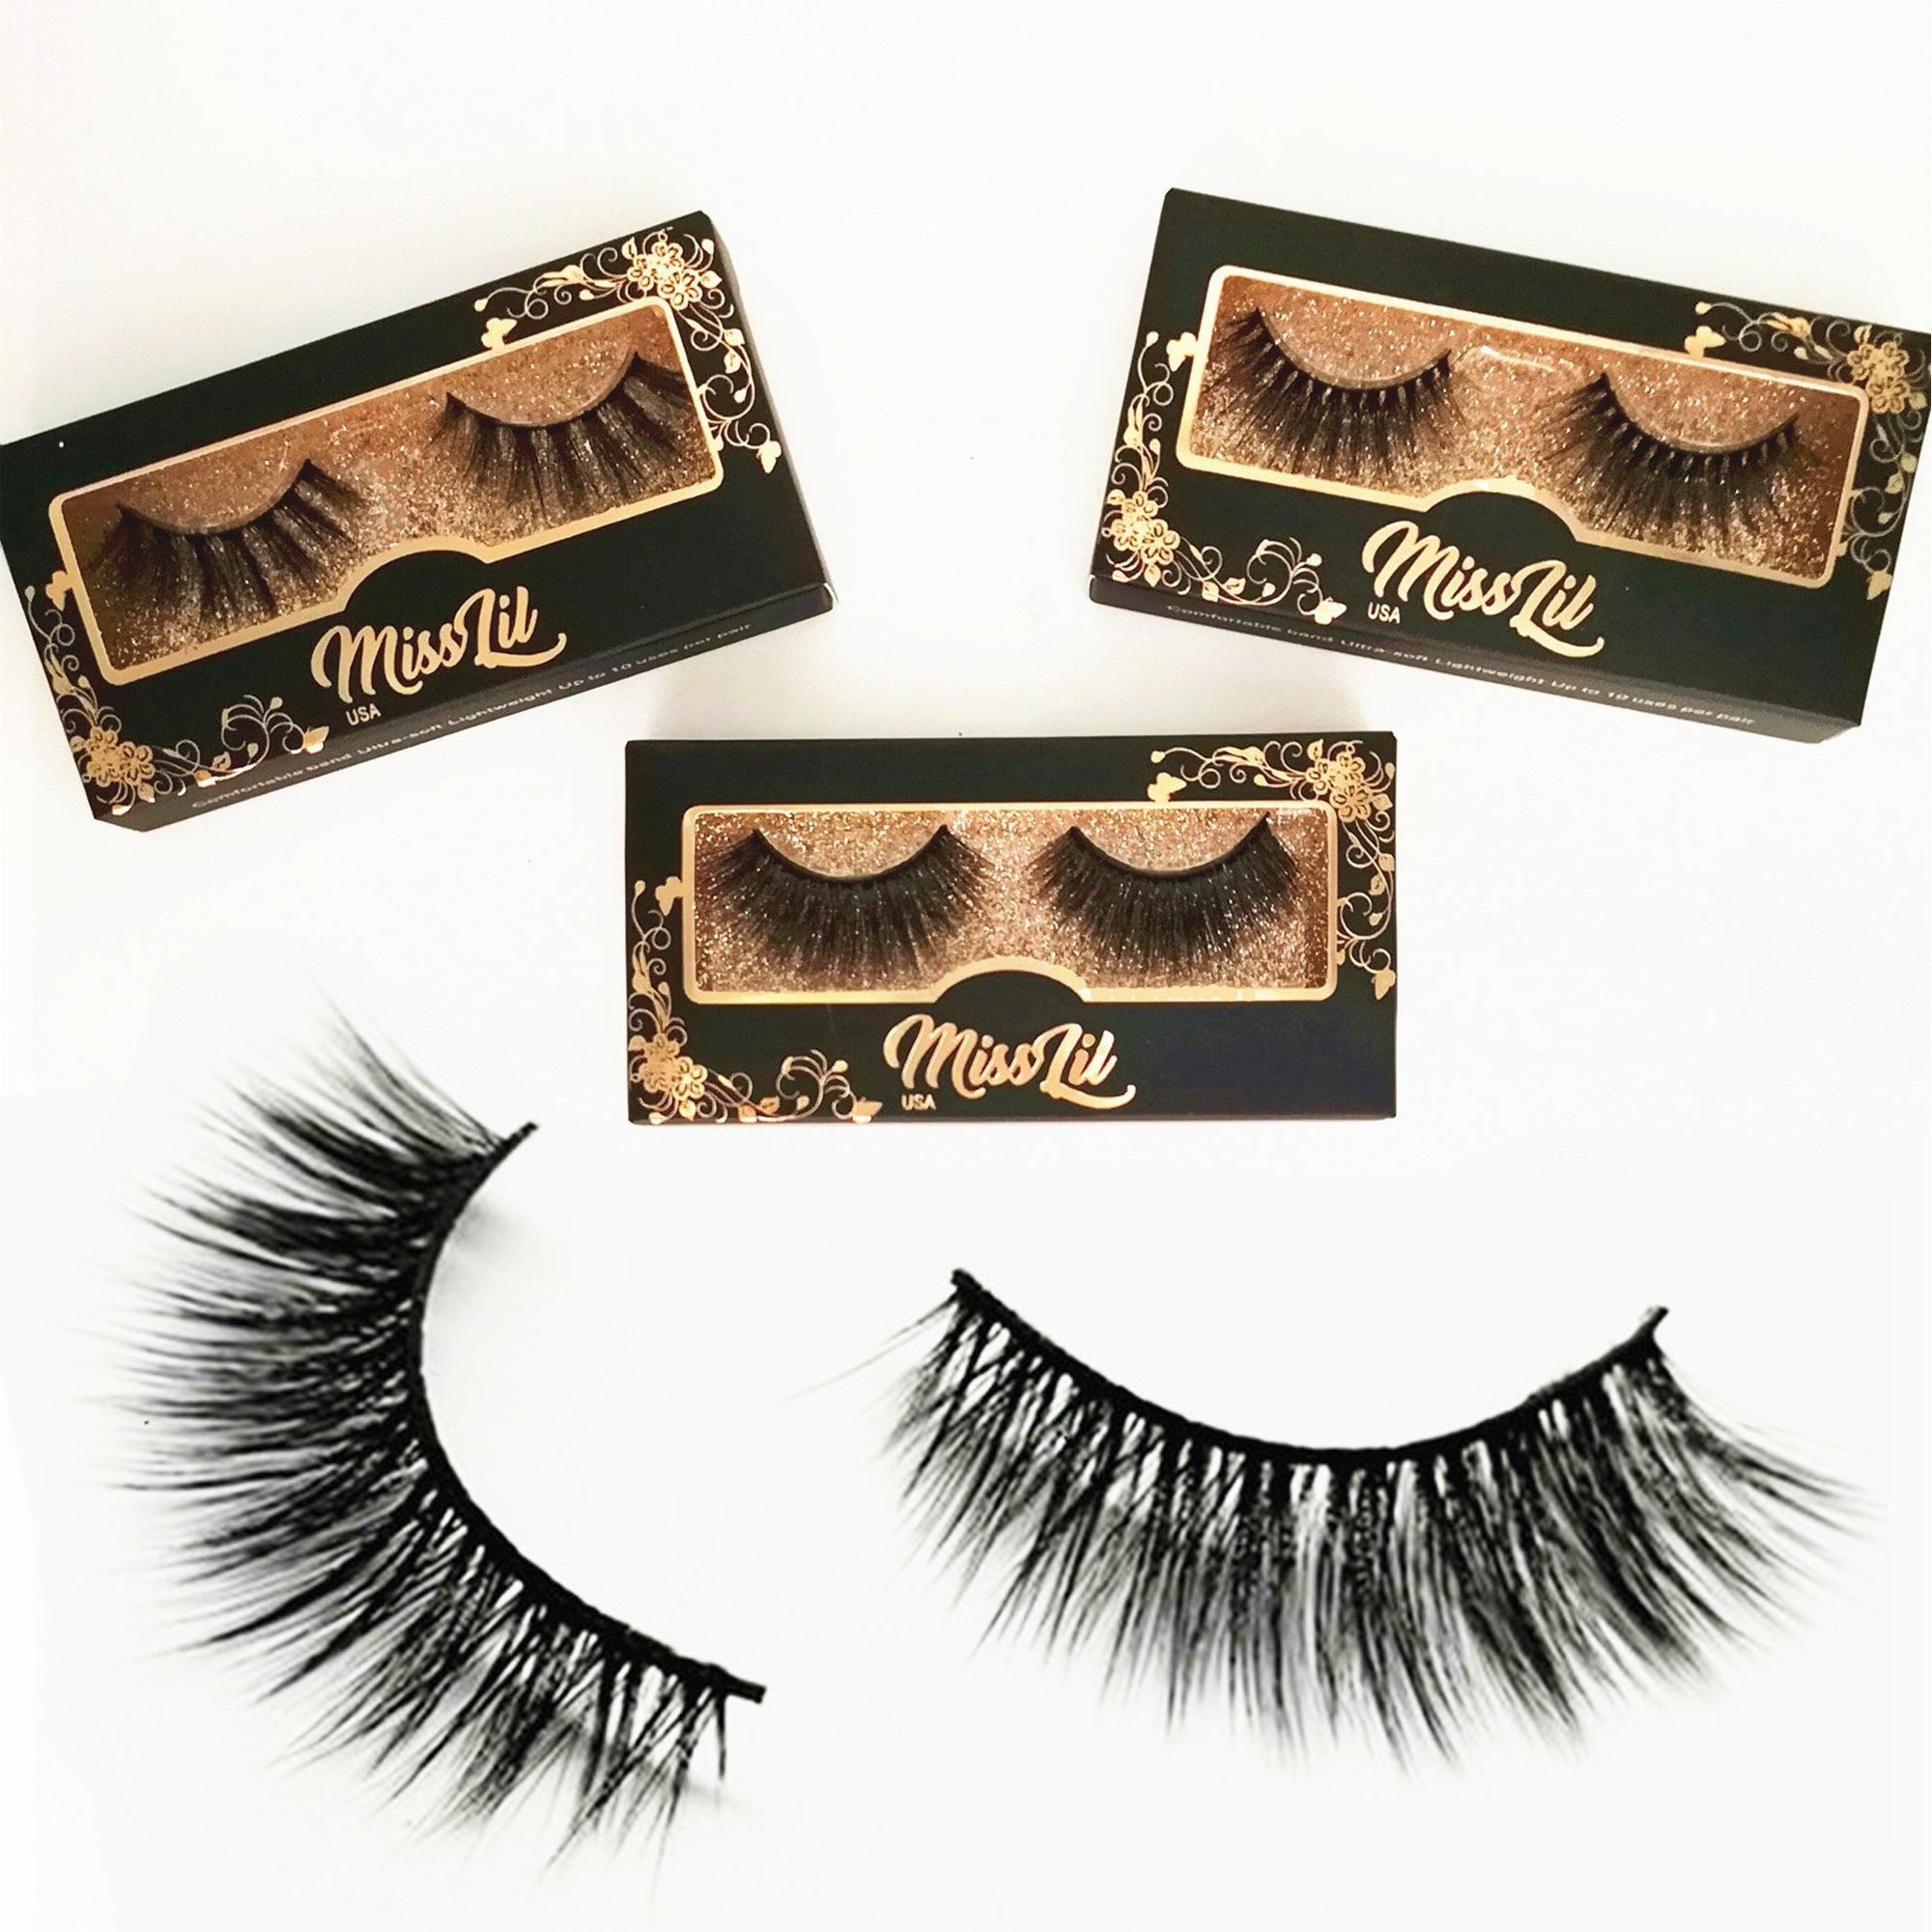 1-Pair Miss Lil USA Lashes #27 (Pack of 12) - Miss Lil USA Wholesale